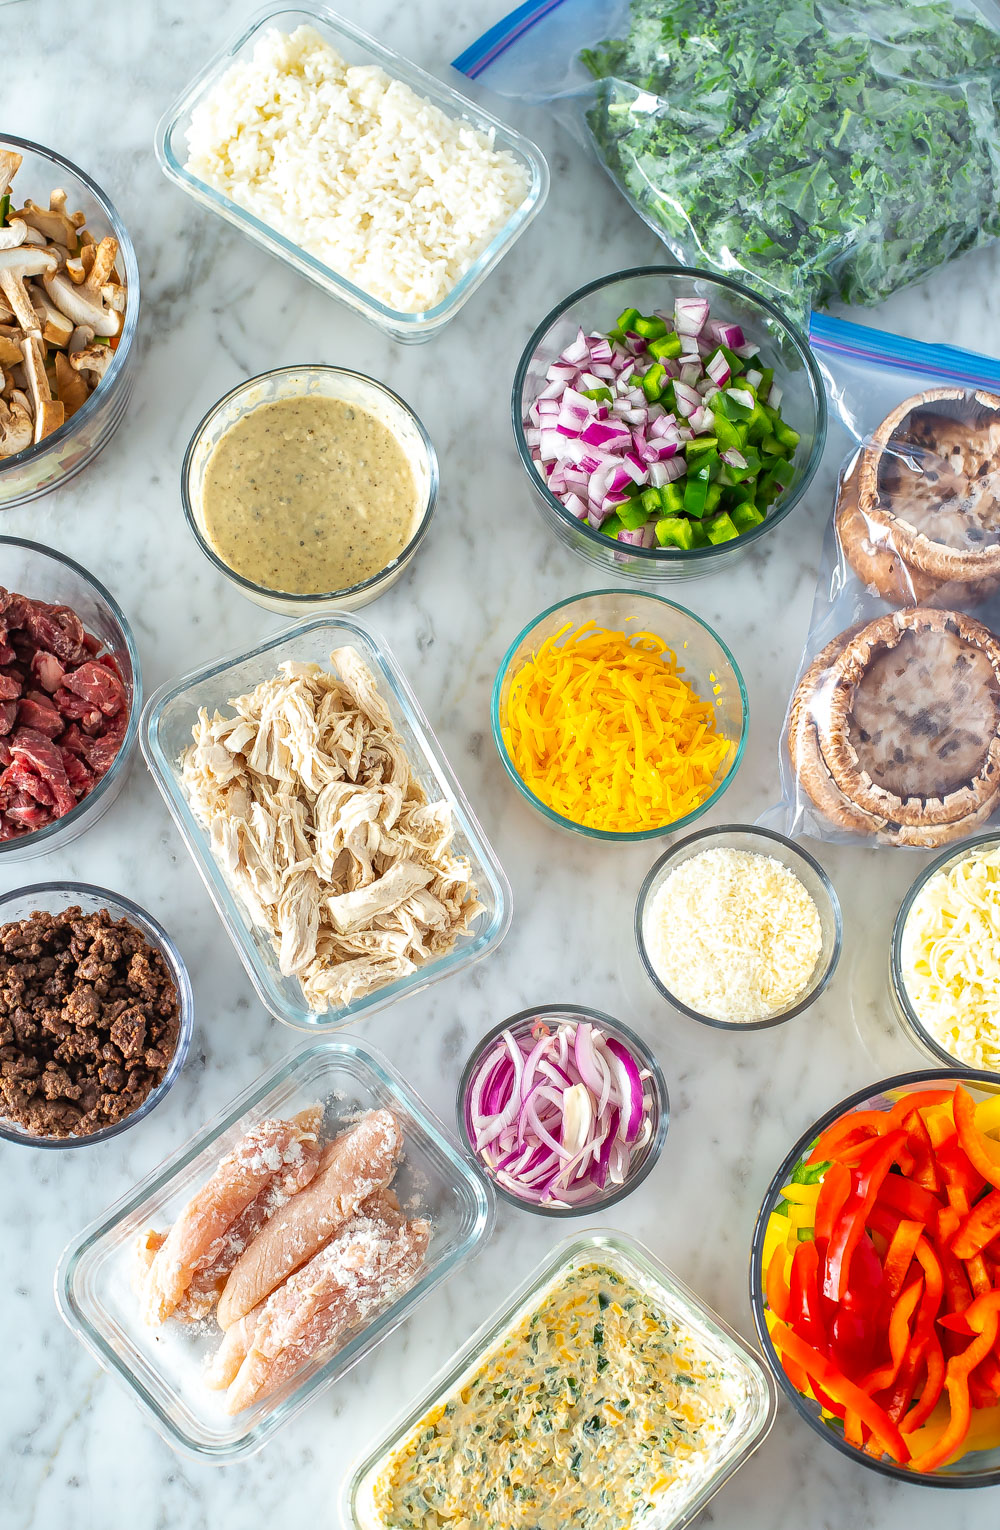 Several ingredients prepped ahead of time for meal prep.